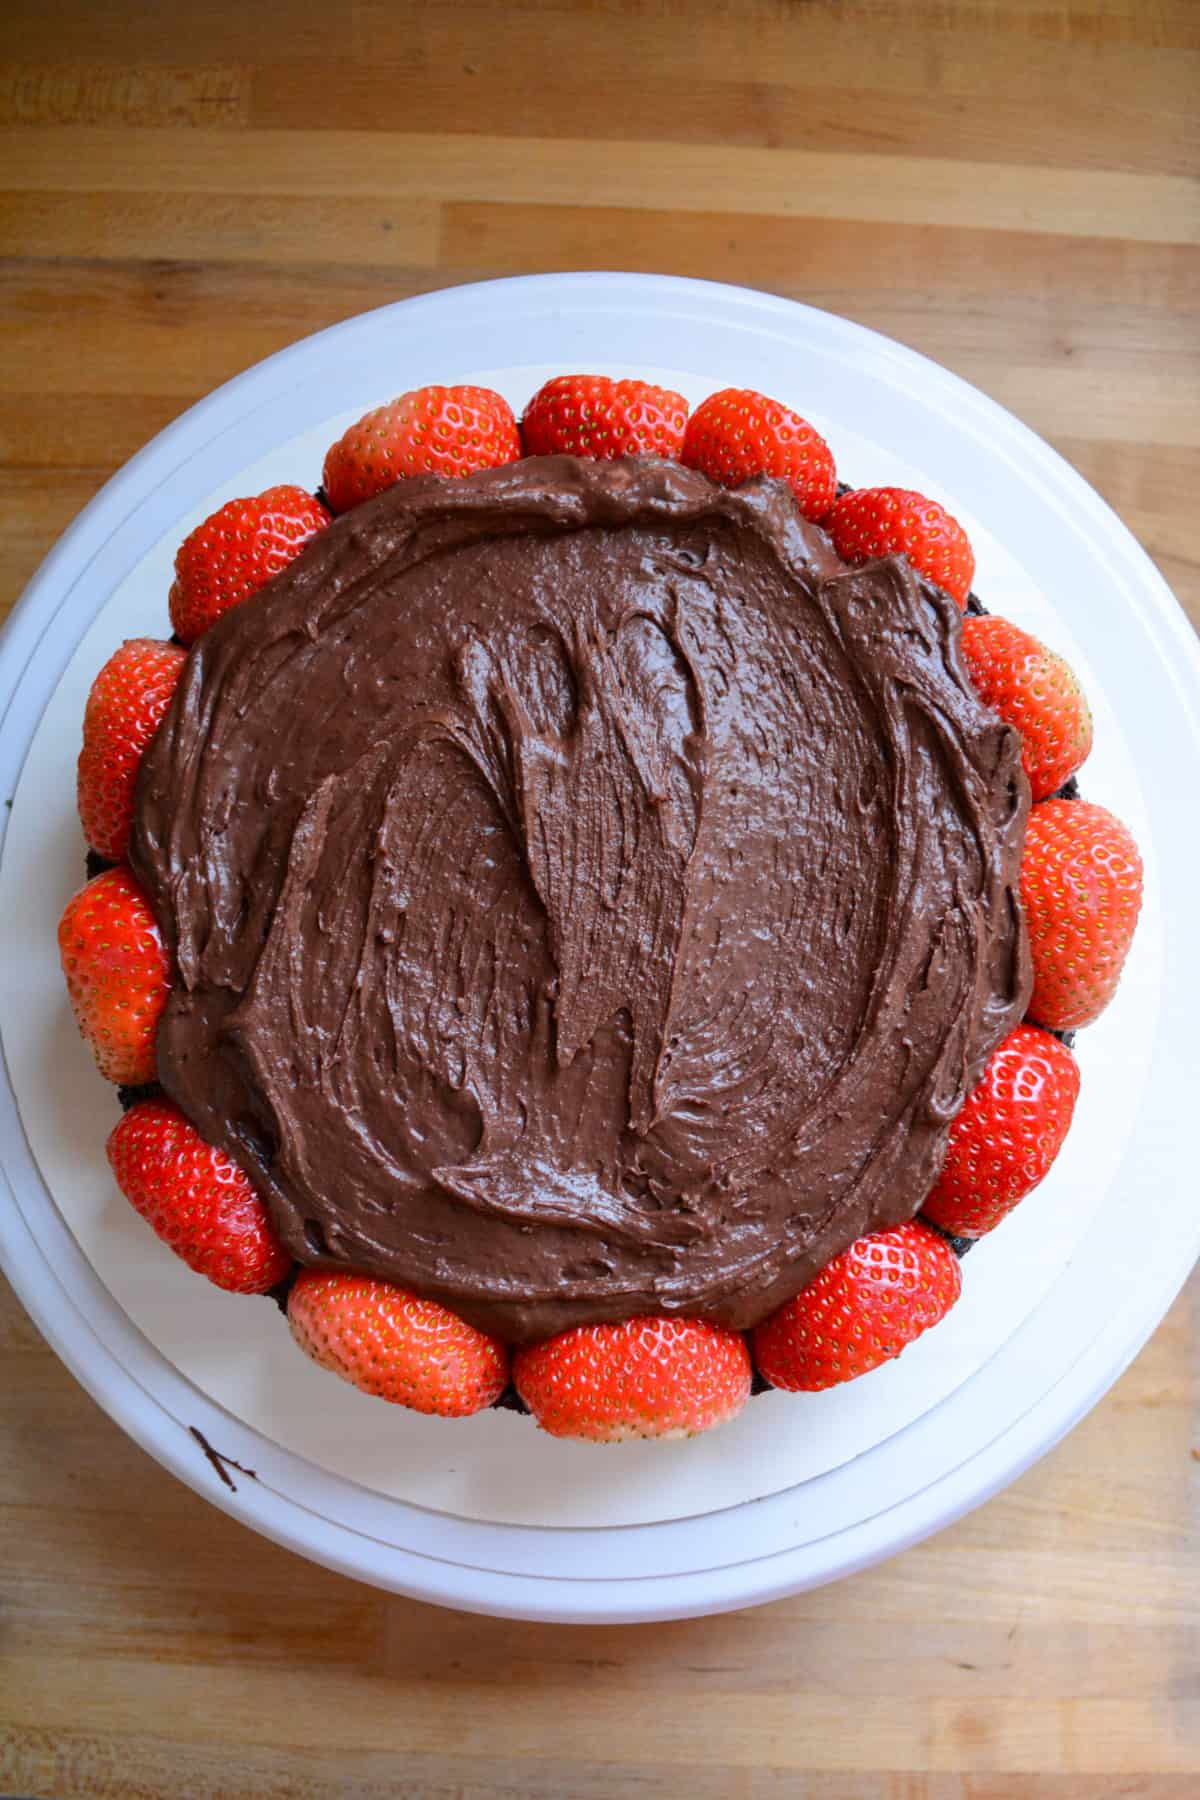 Vegan chocolate fudge filling added into the middle of the strawberries.